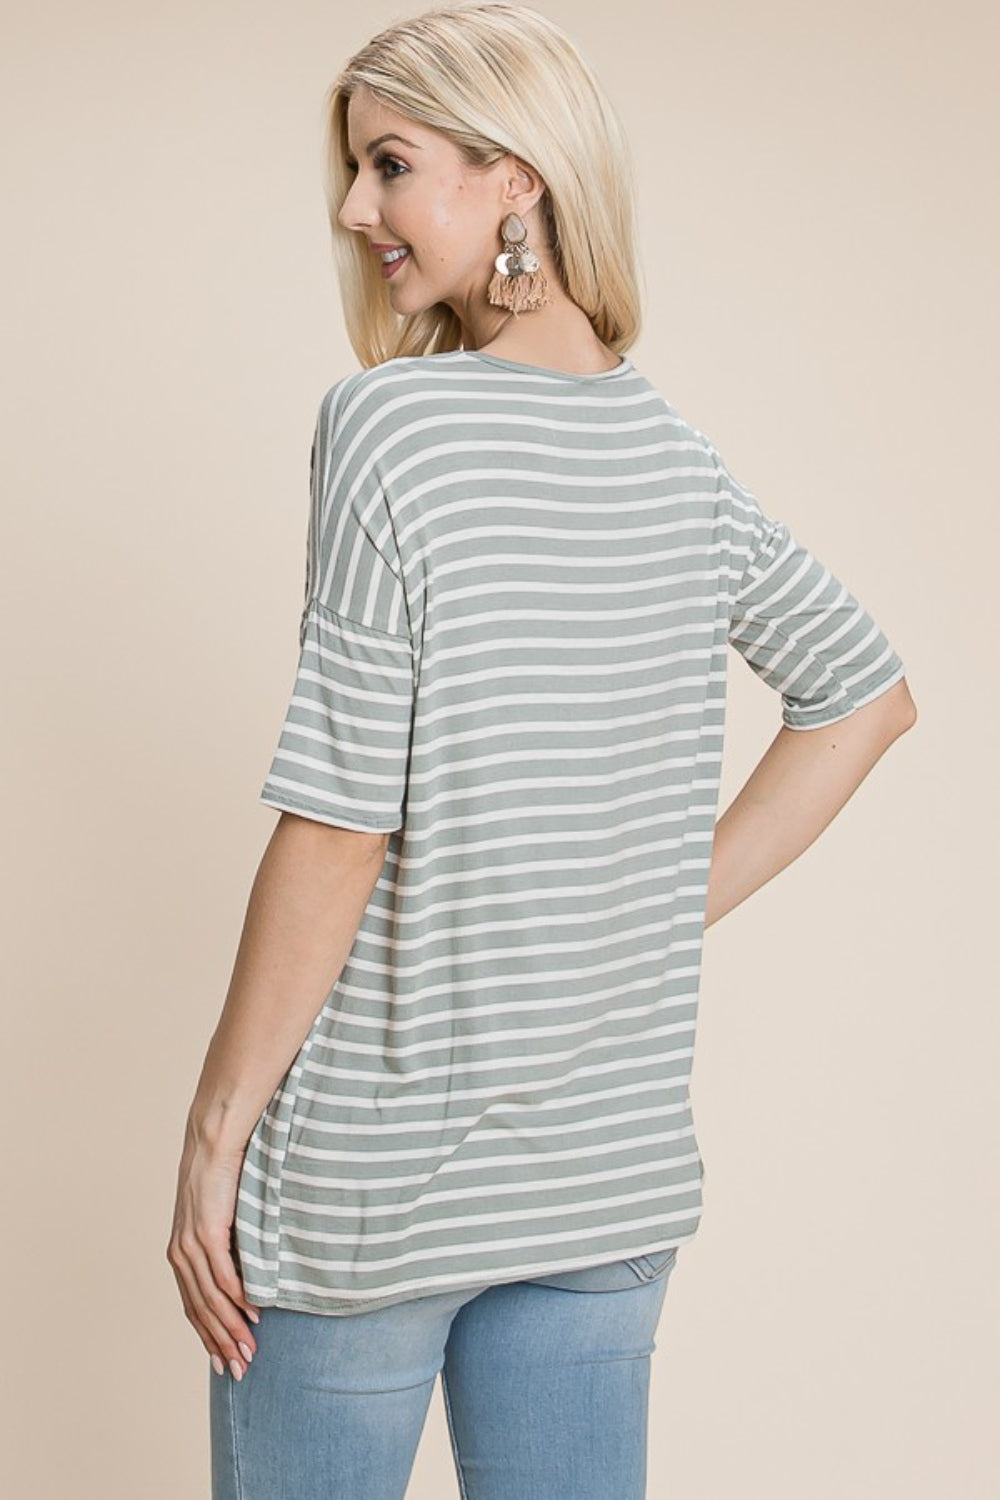 All About Stripes Top - Sage